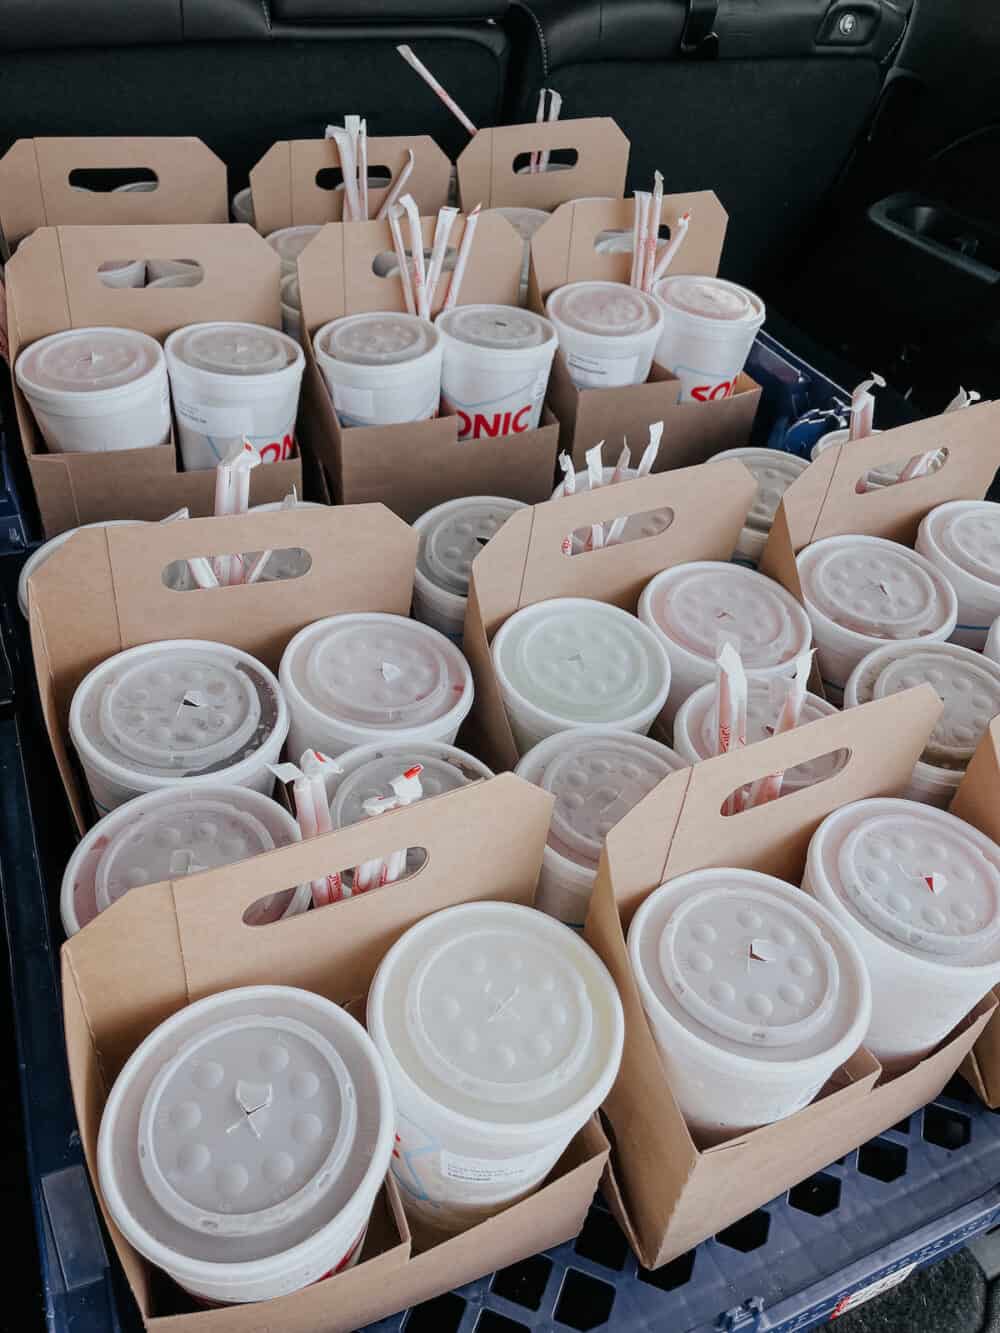 sonic drinks loaded in the back of a vehicle